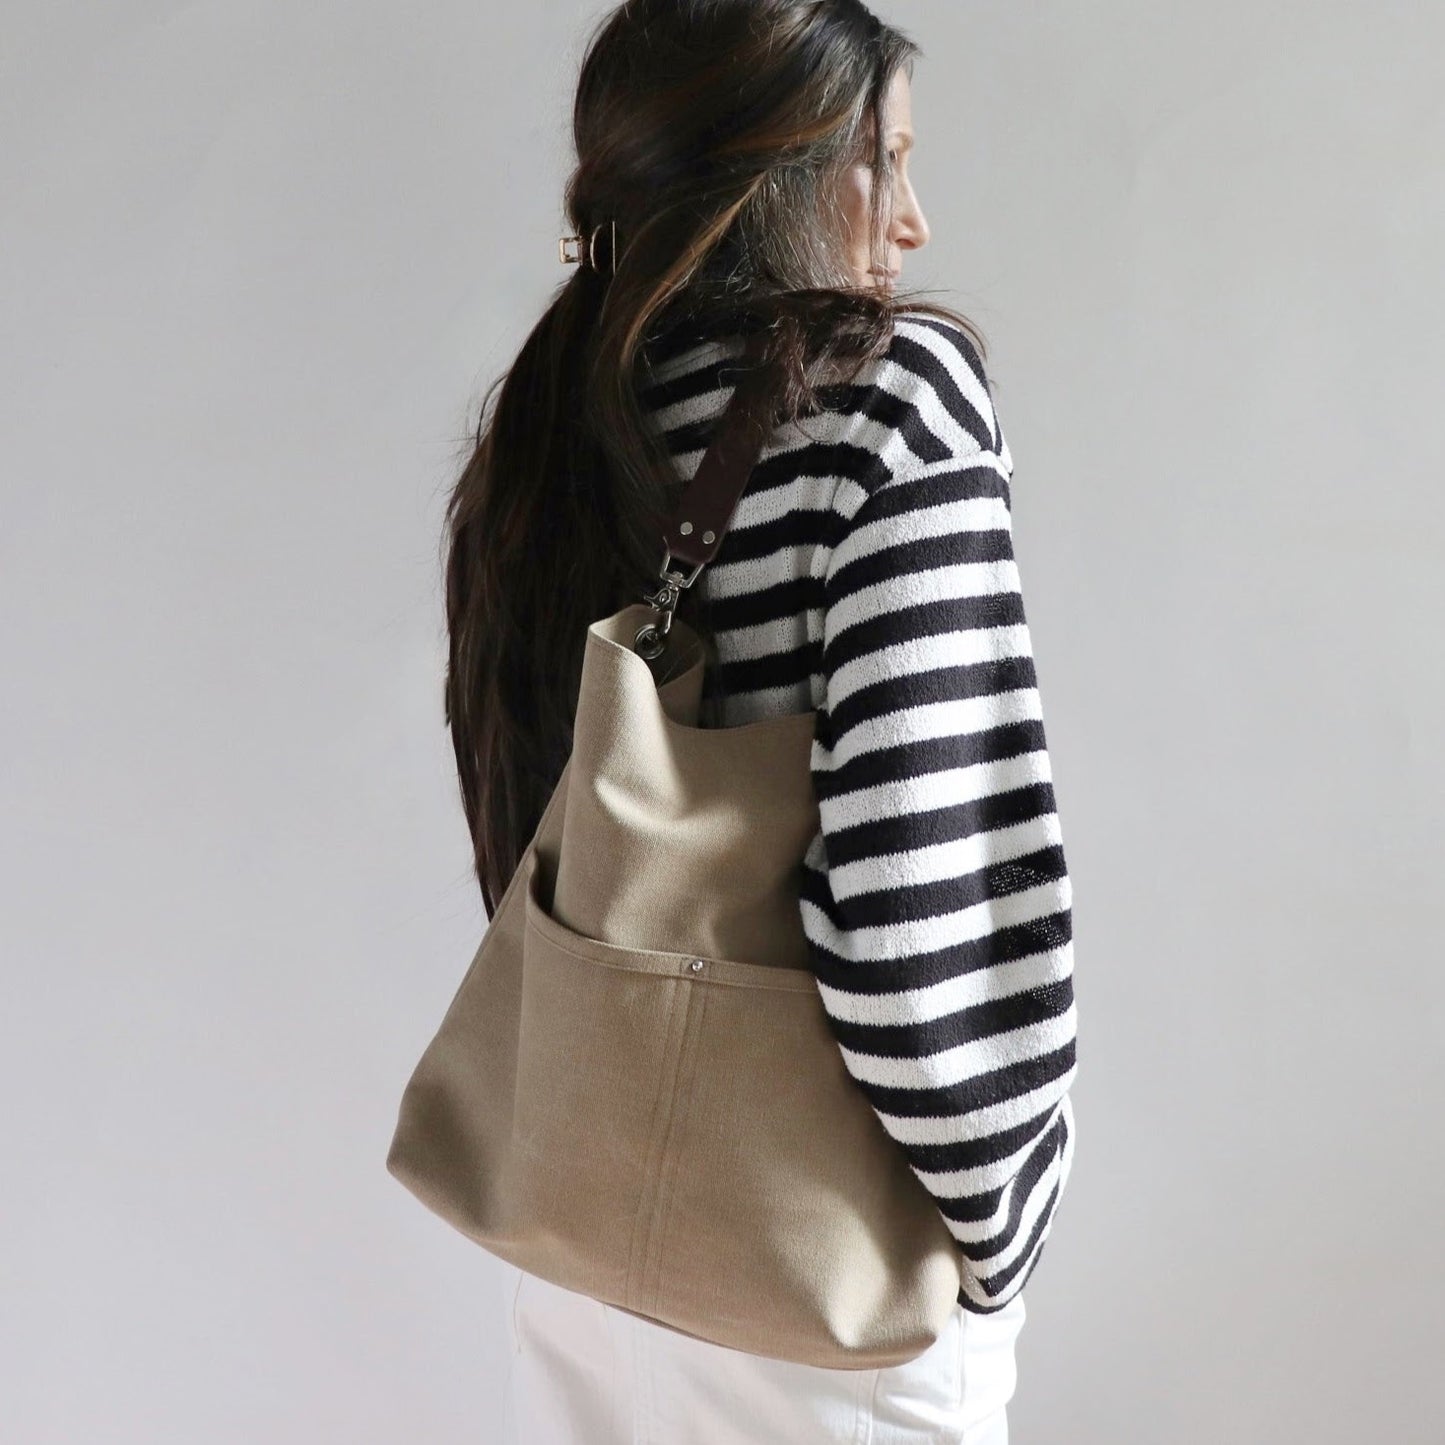 Lifestyle photo of model in white pants and black and white striped sweater holding casual canvas shoulder bag